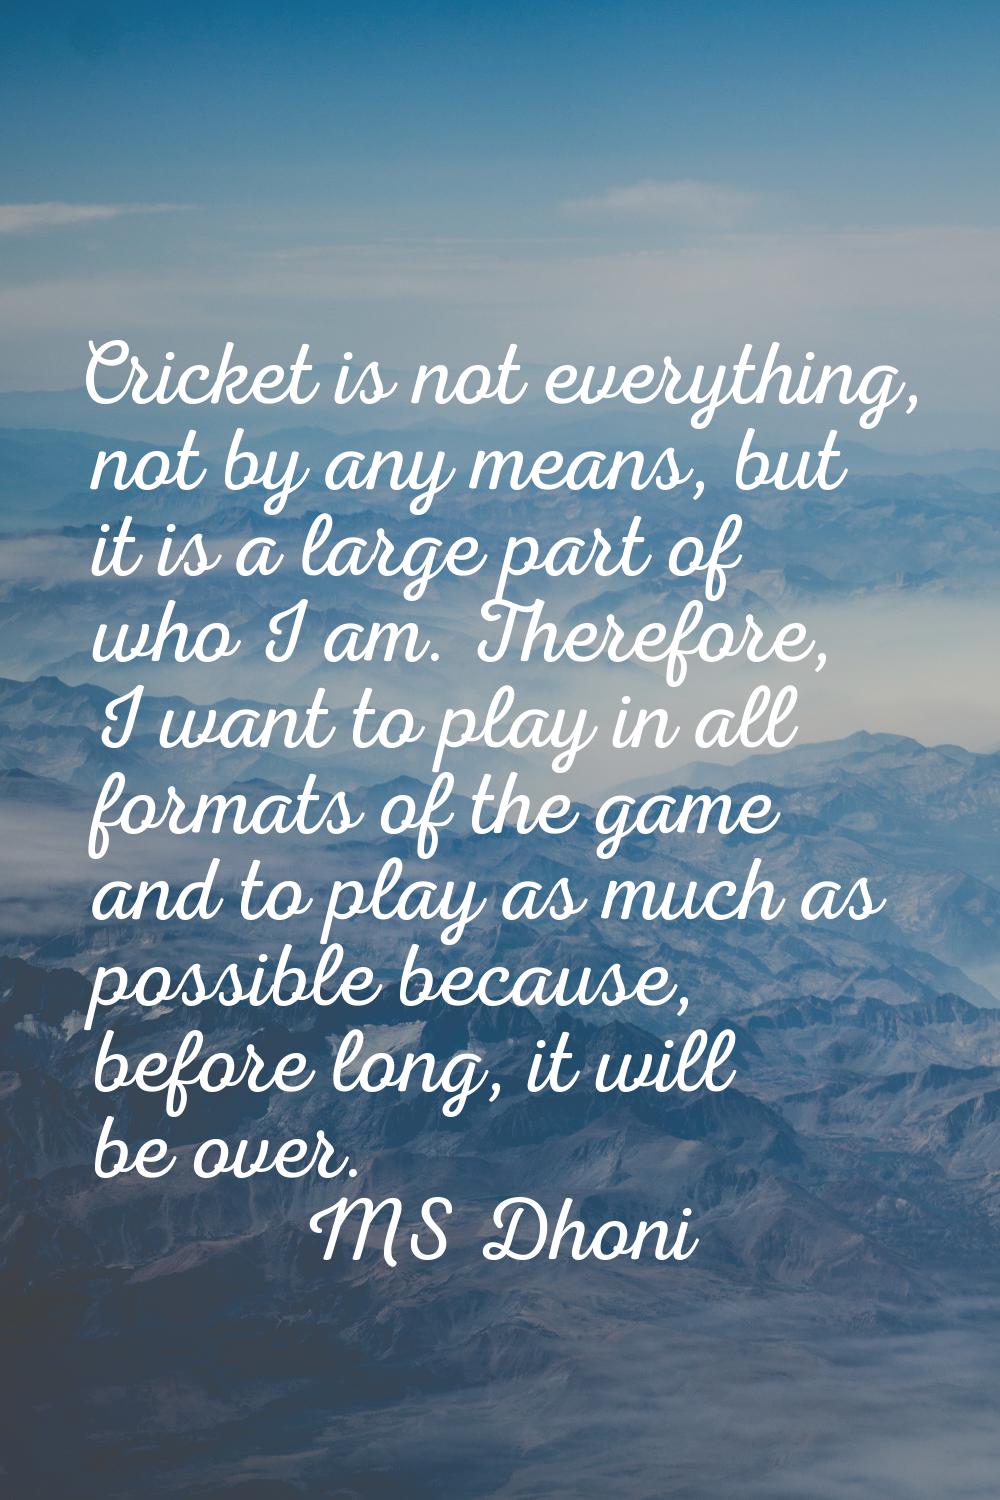 Cricket is not everything, not by any means, but it is a large part of who I am. Therefore, I want 